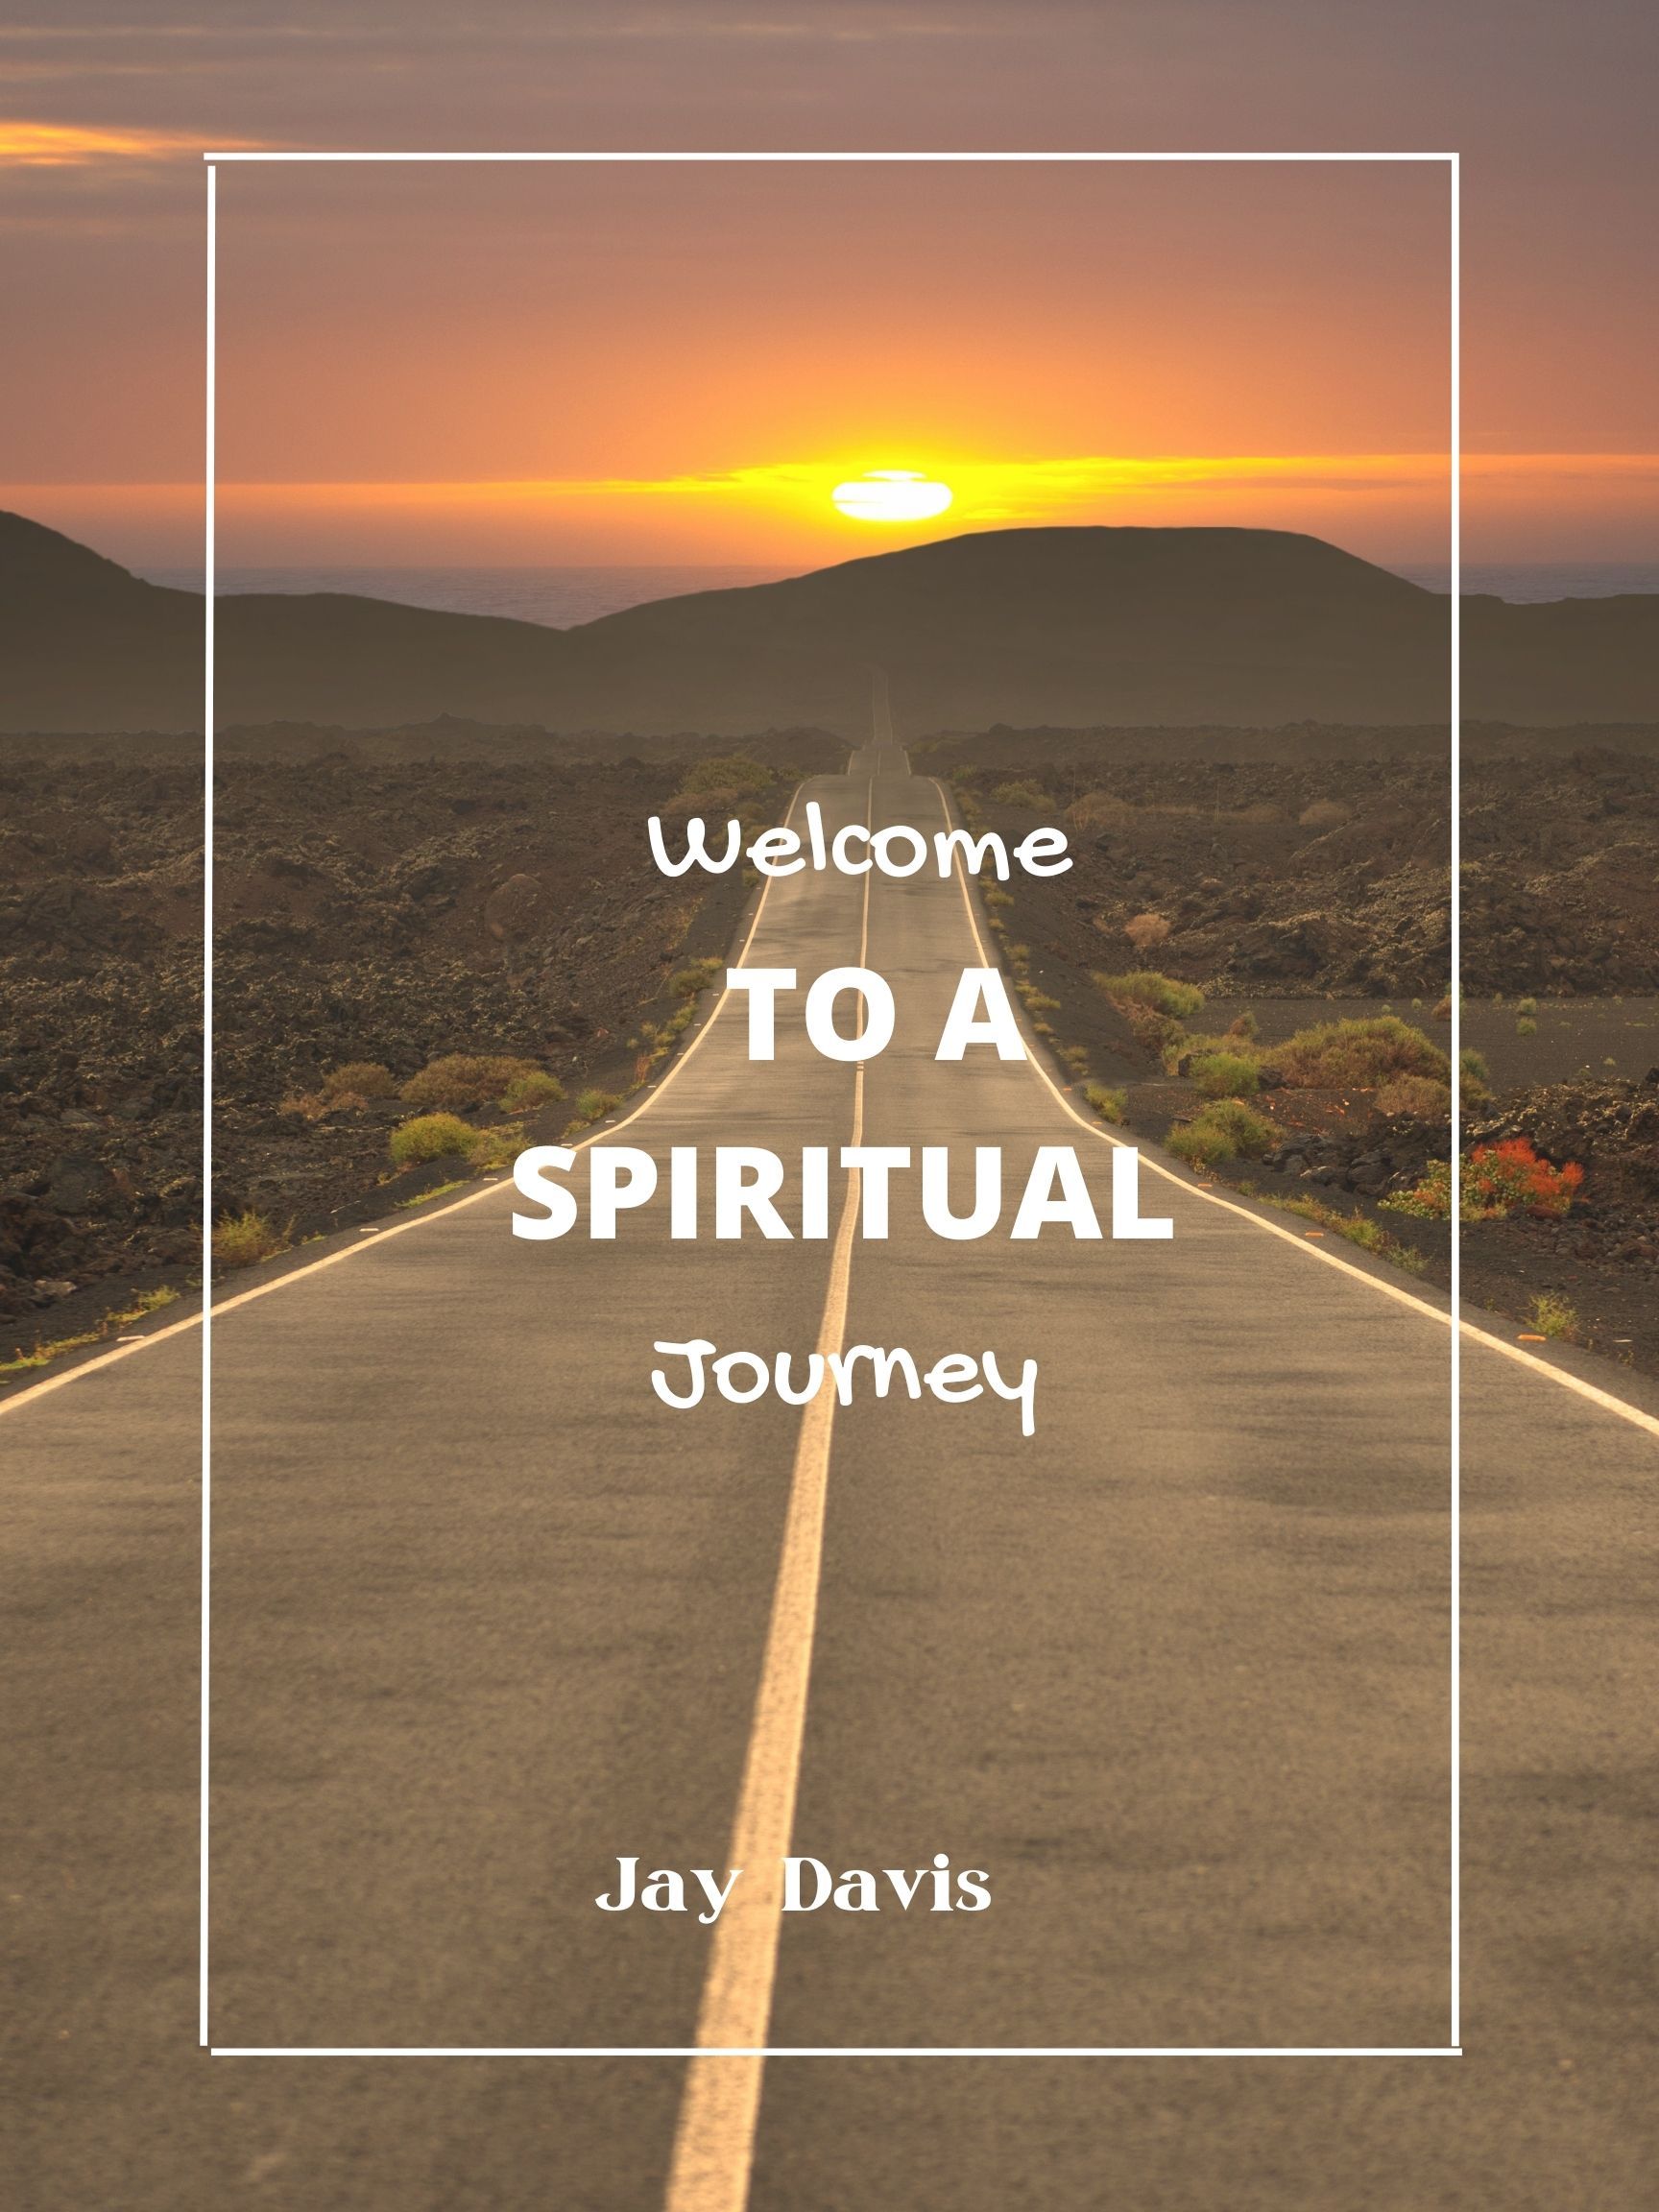 WELCOME TO A SPIRITUAL JOURNEY